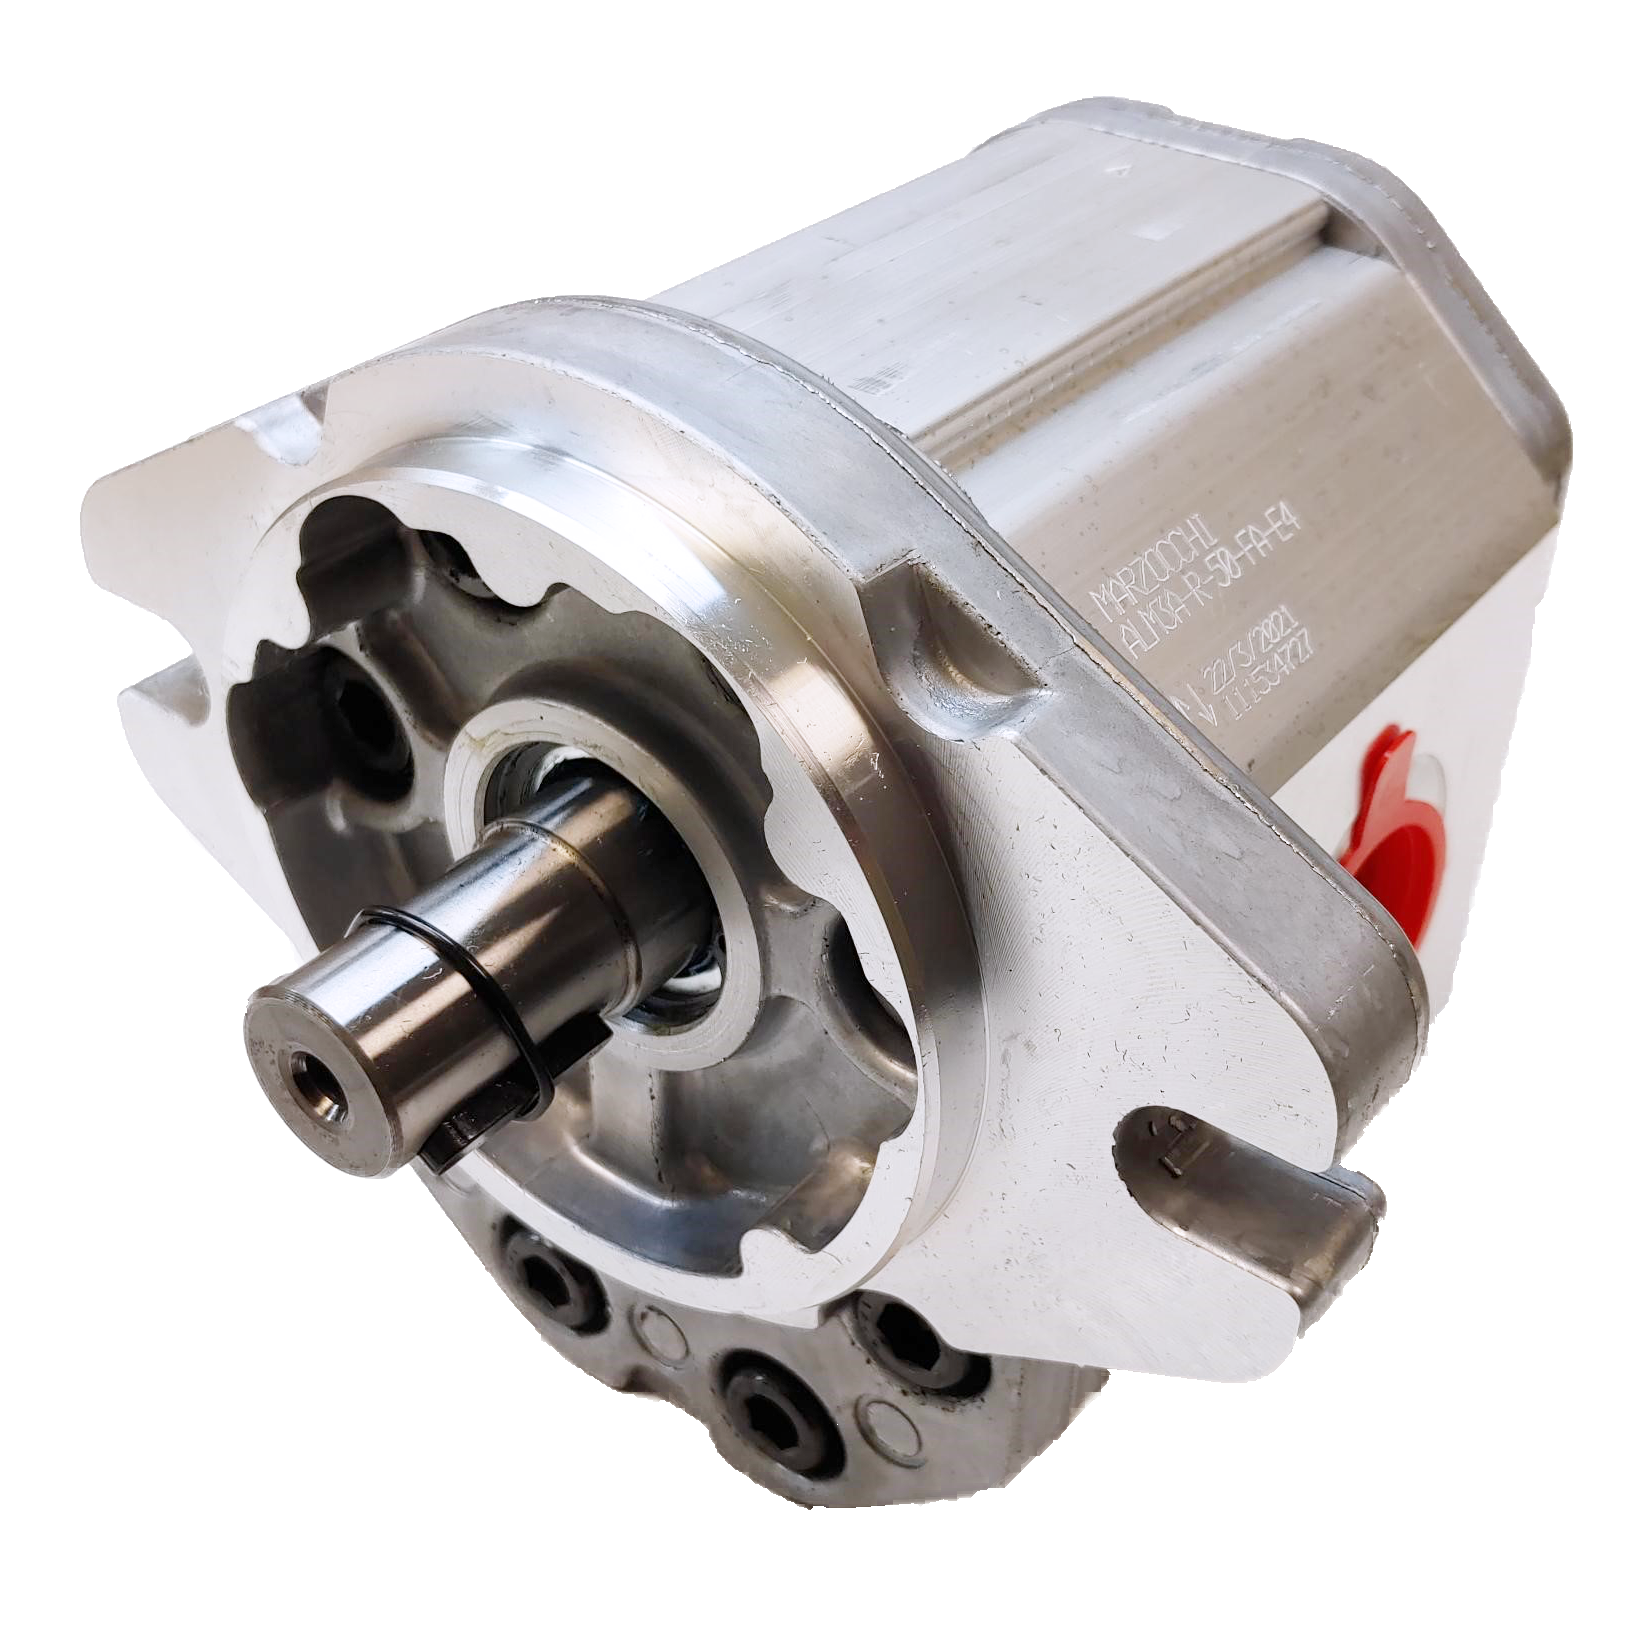 ALM3A-R-50-E4 : Marzocchi Gear Motor, Bidirectional, 33cc, 3335psi rated, 3300RPM, 1" Code 61 ports, 5/8" Bore x 5/32" Keyed Shaft